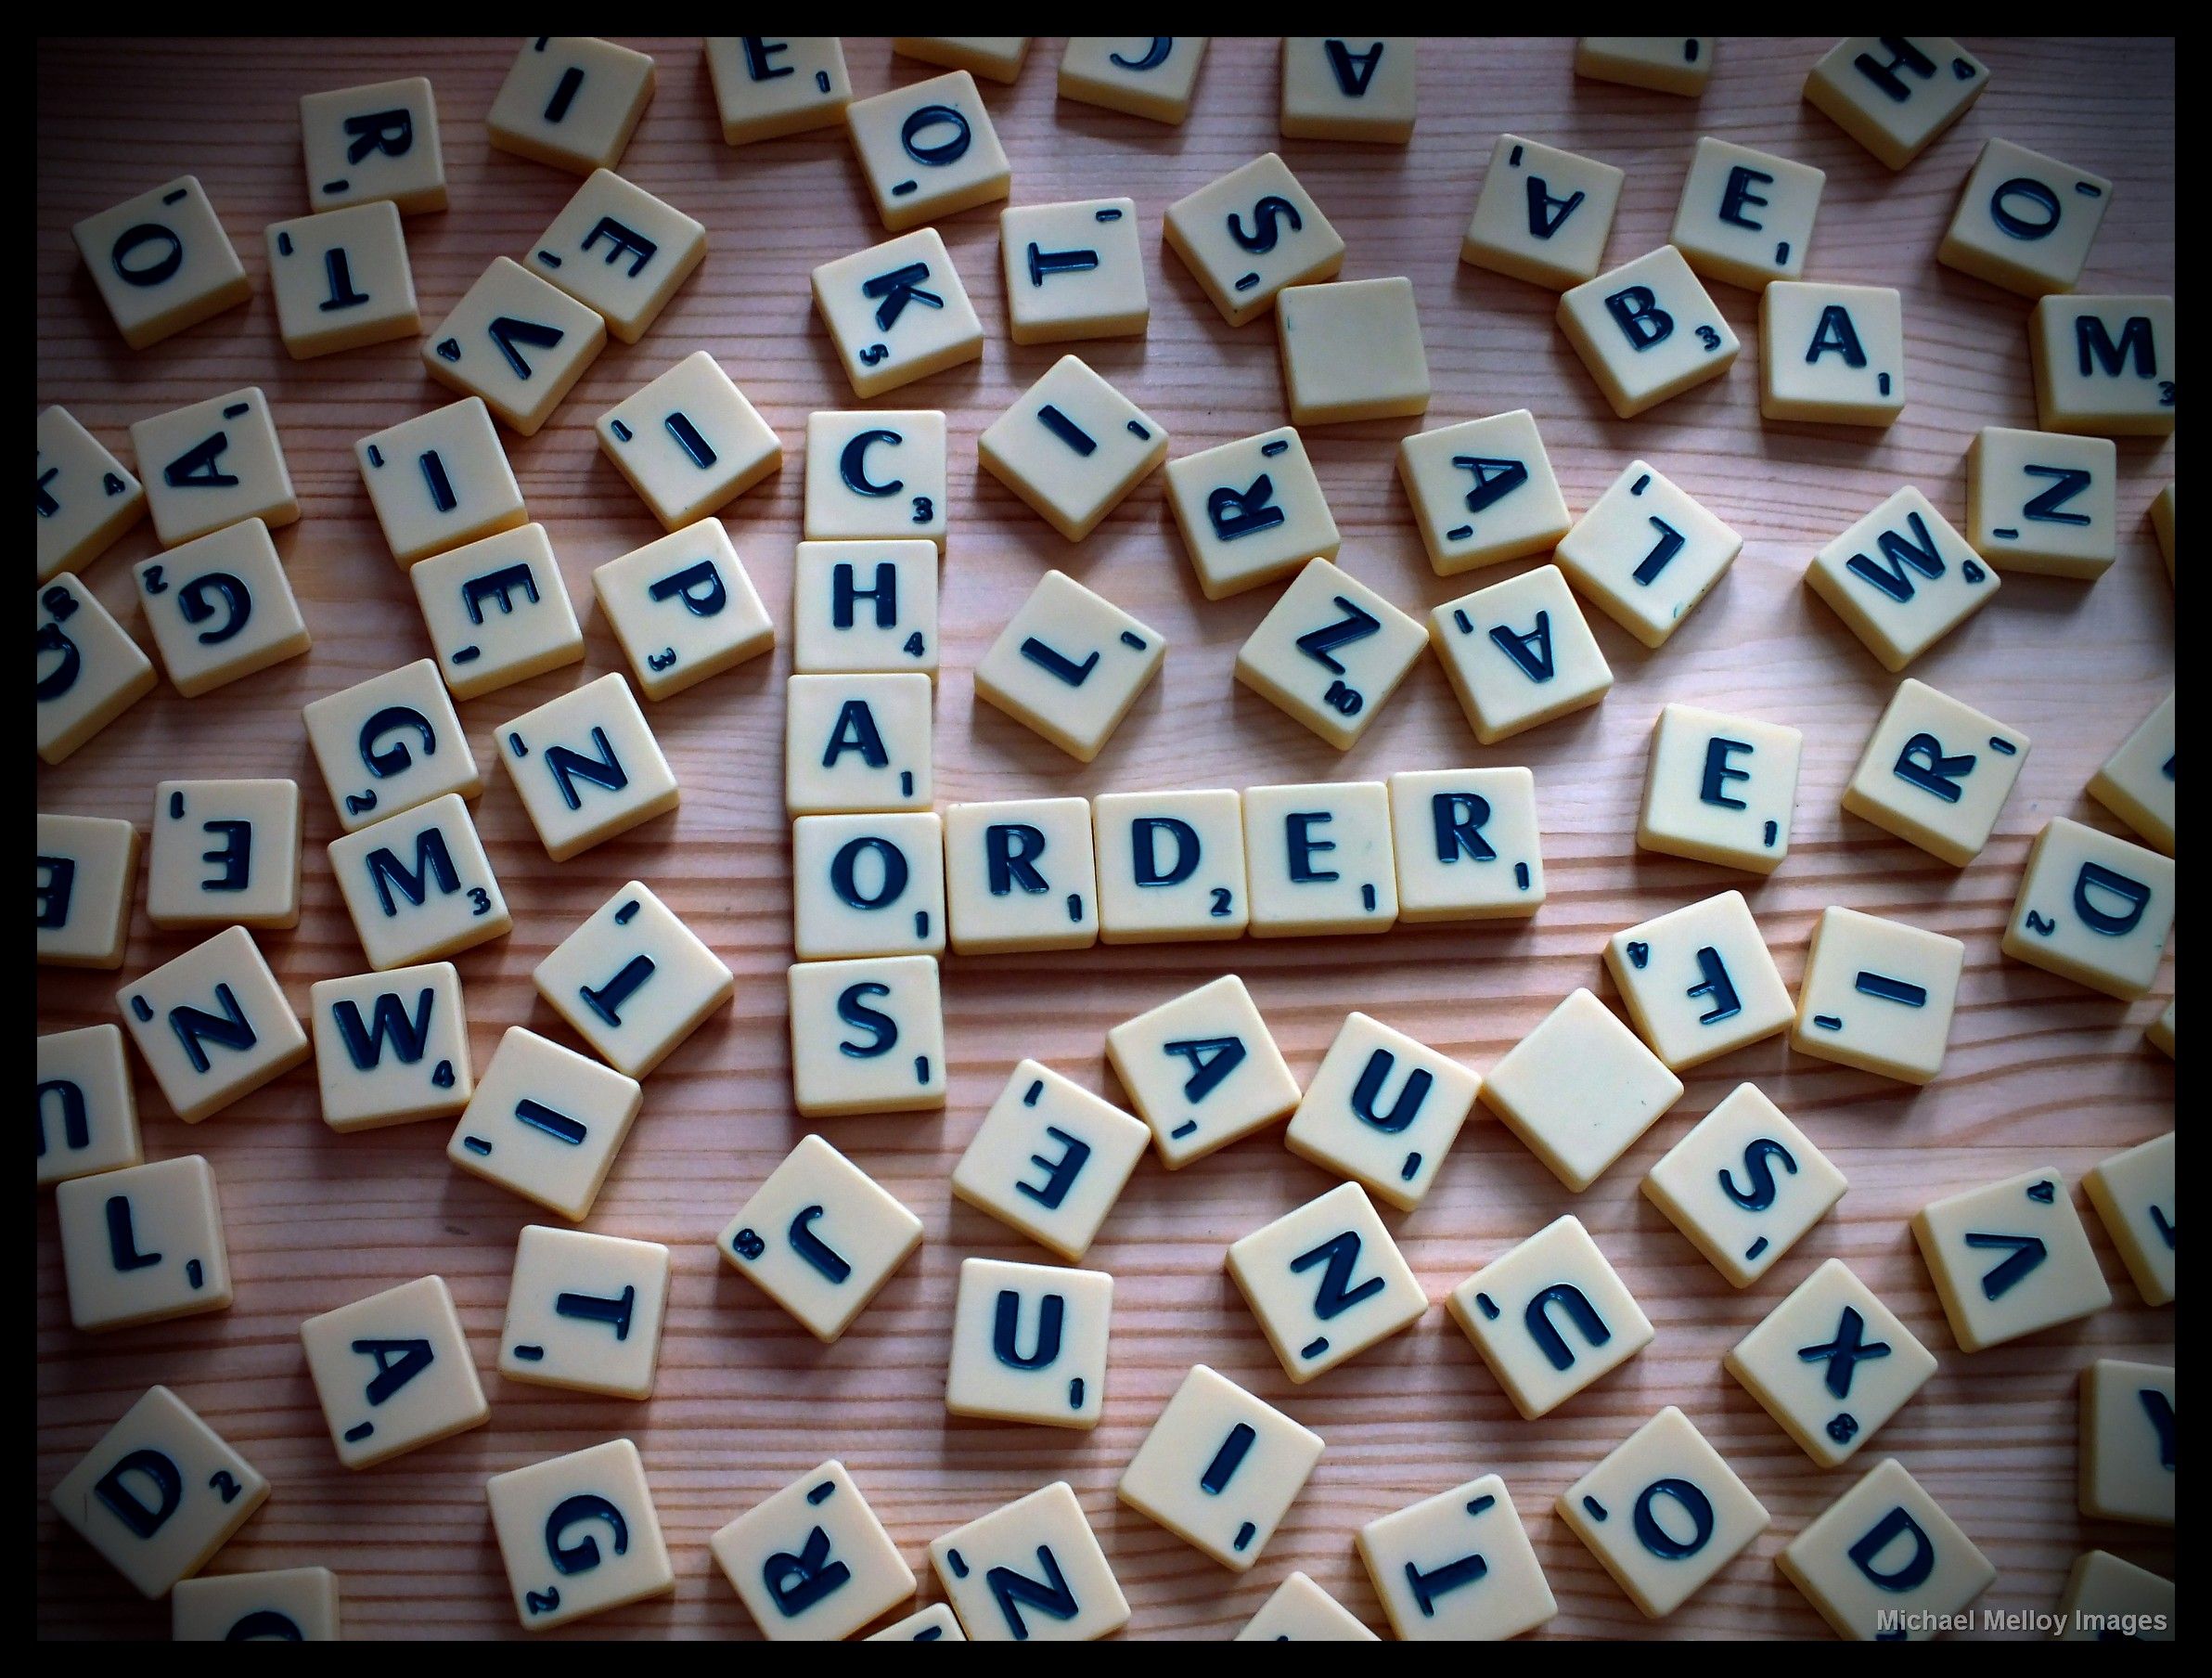 Wallpaper, game, Toy, toys, words, Chaos, order, letters, games, Scrabble, Alphabet, toybox, project 365project, captureyour365 2384x1808